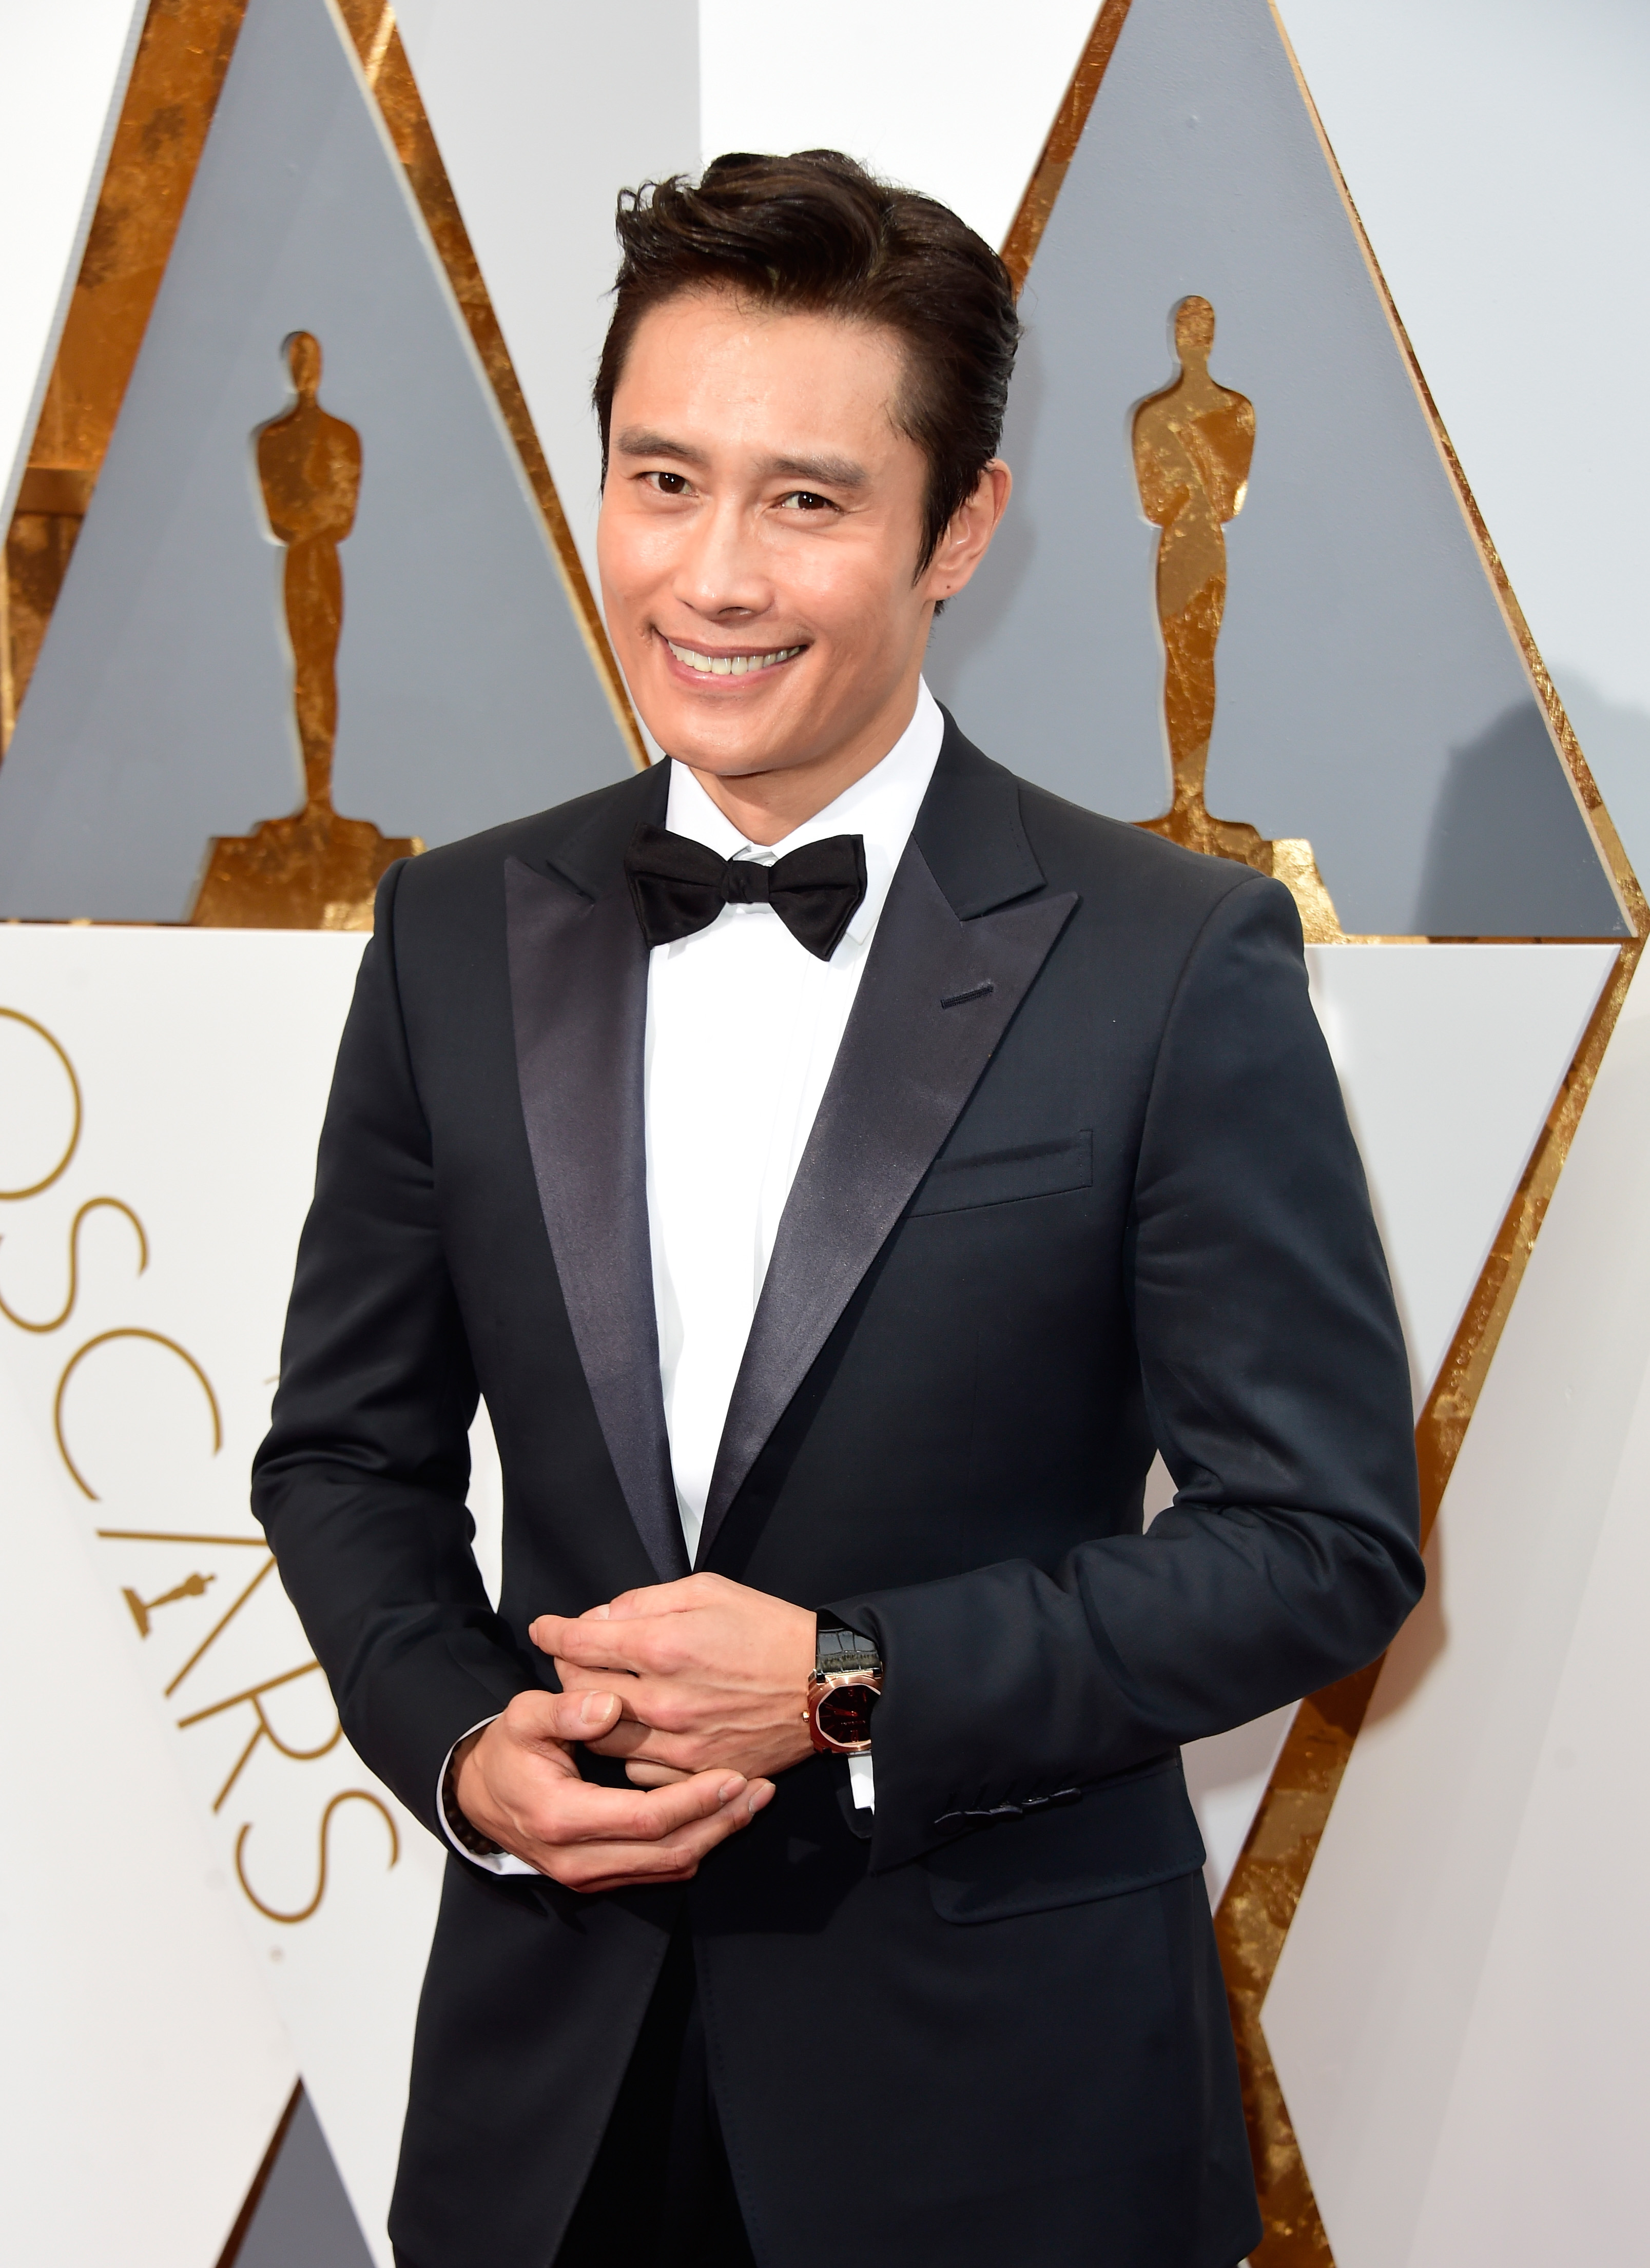 Lee Byung-hun during the 88th Annual Academy Awards at Hollywood & Highland Center on February 28, 2016, in Hollywood, California. | Source: Getty Images